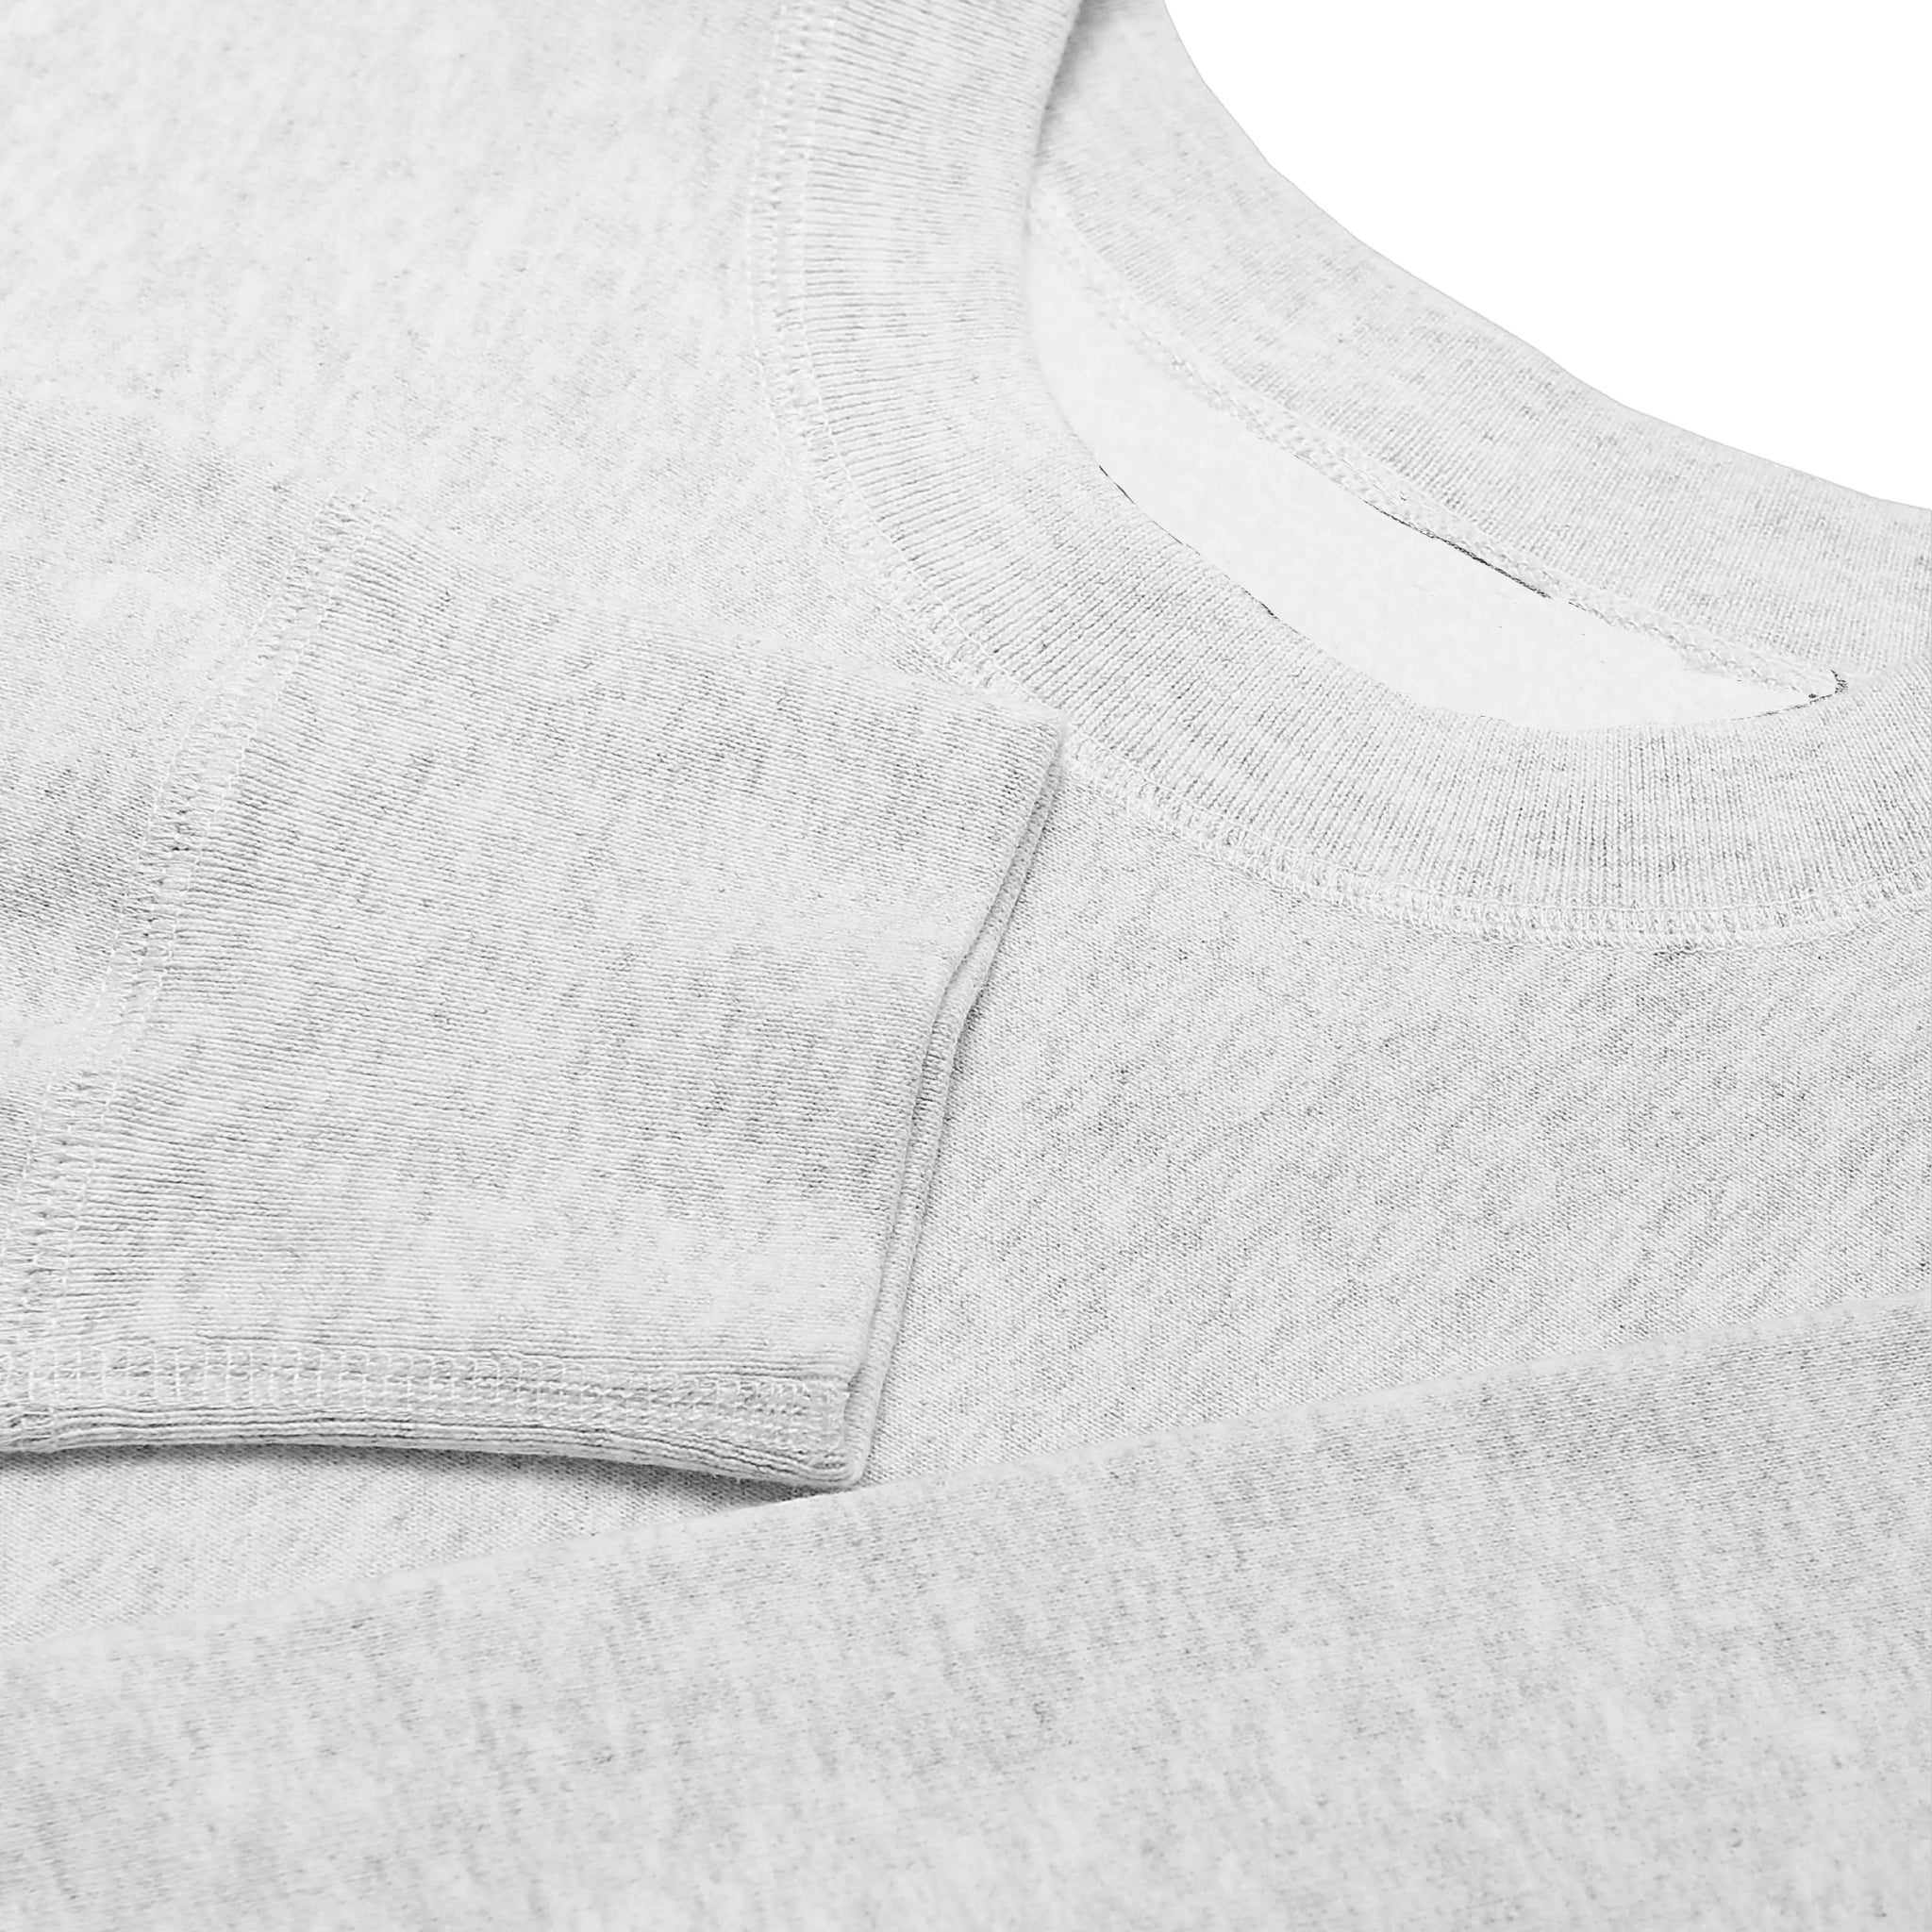 knit detail of heavyweight crewneck in 100% light grey cotton.